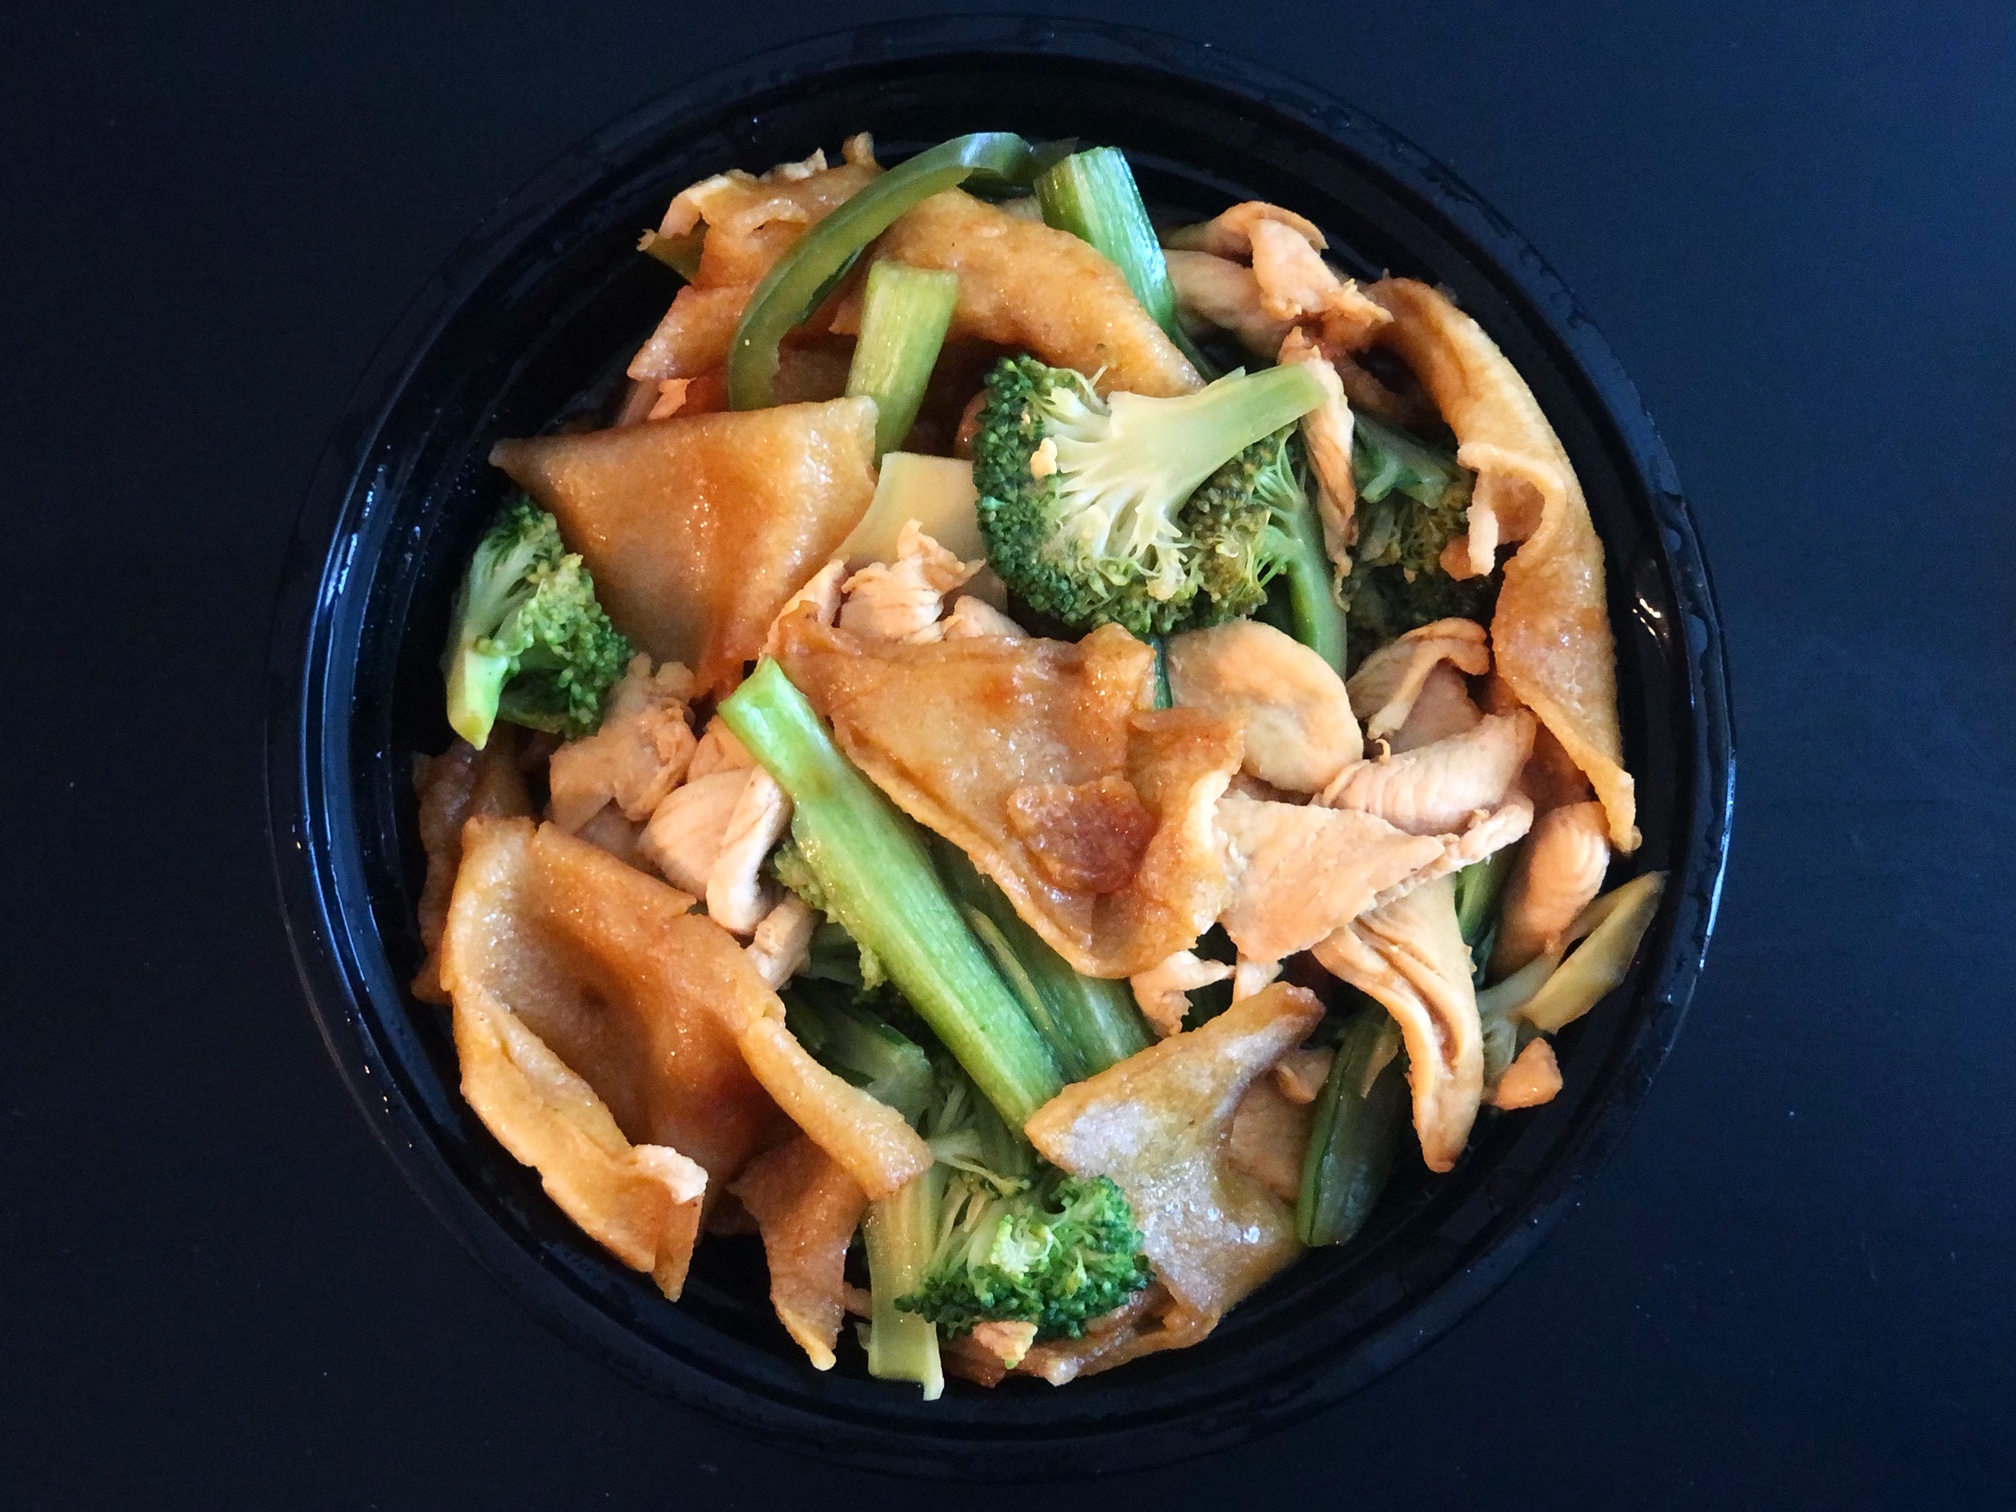 Pad Lard Nar from Sticky Rice in Champaign is filled with chicken, fried noodles, broccoli, and yu choy leaves. Photo by Alyssa Buckley.